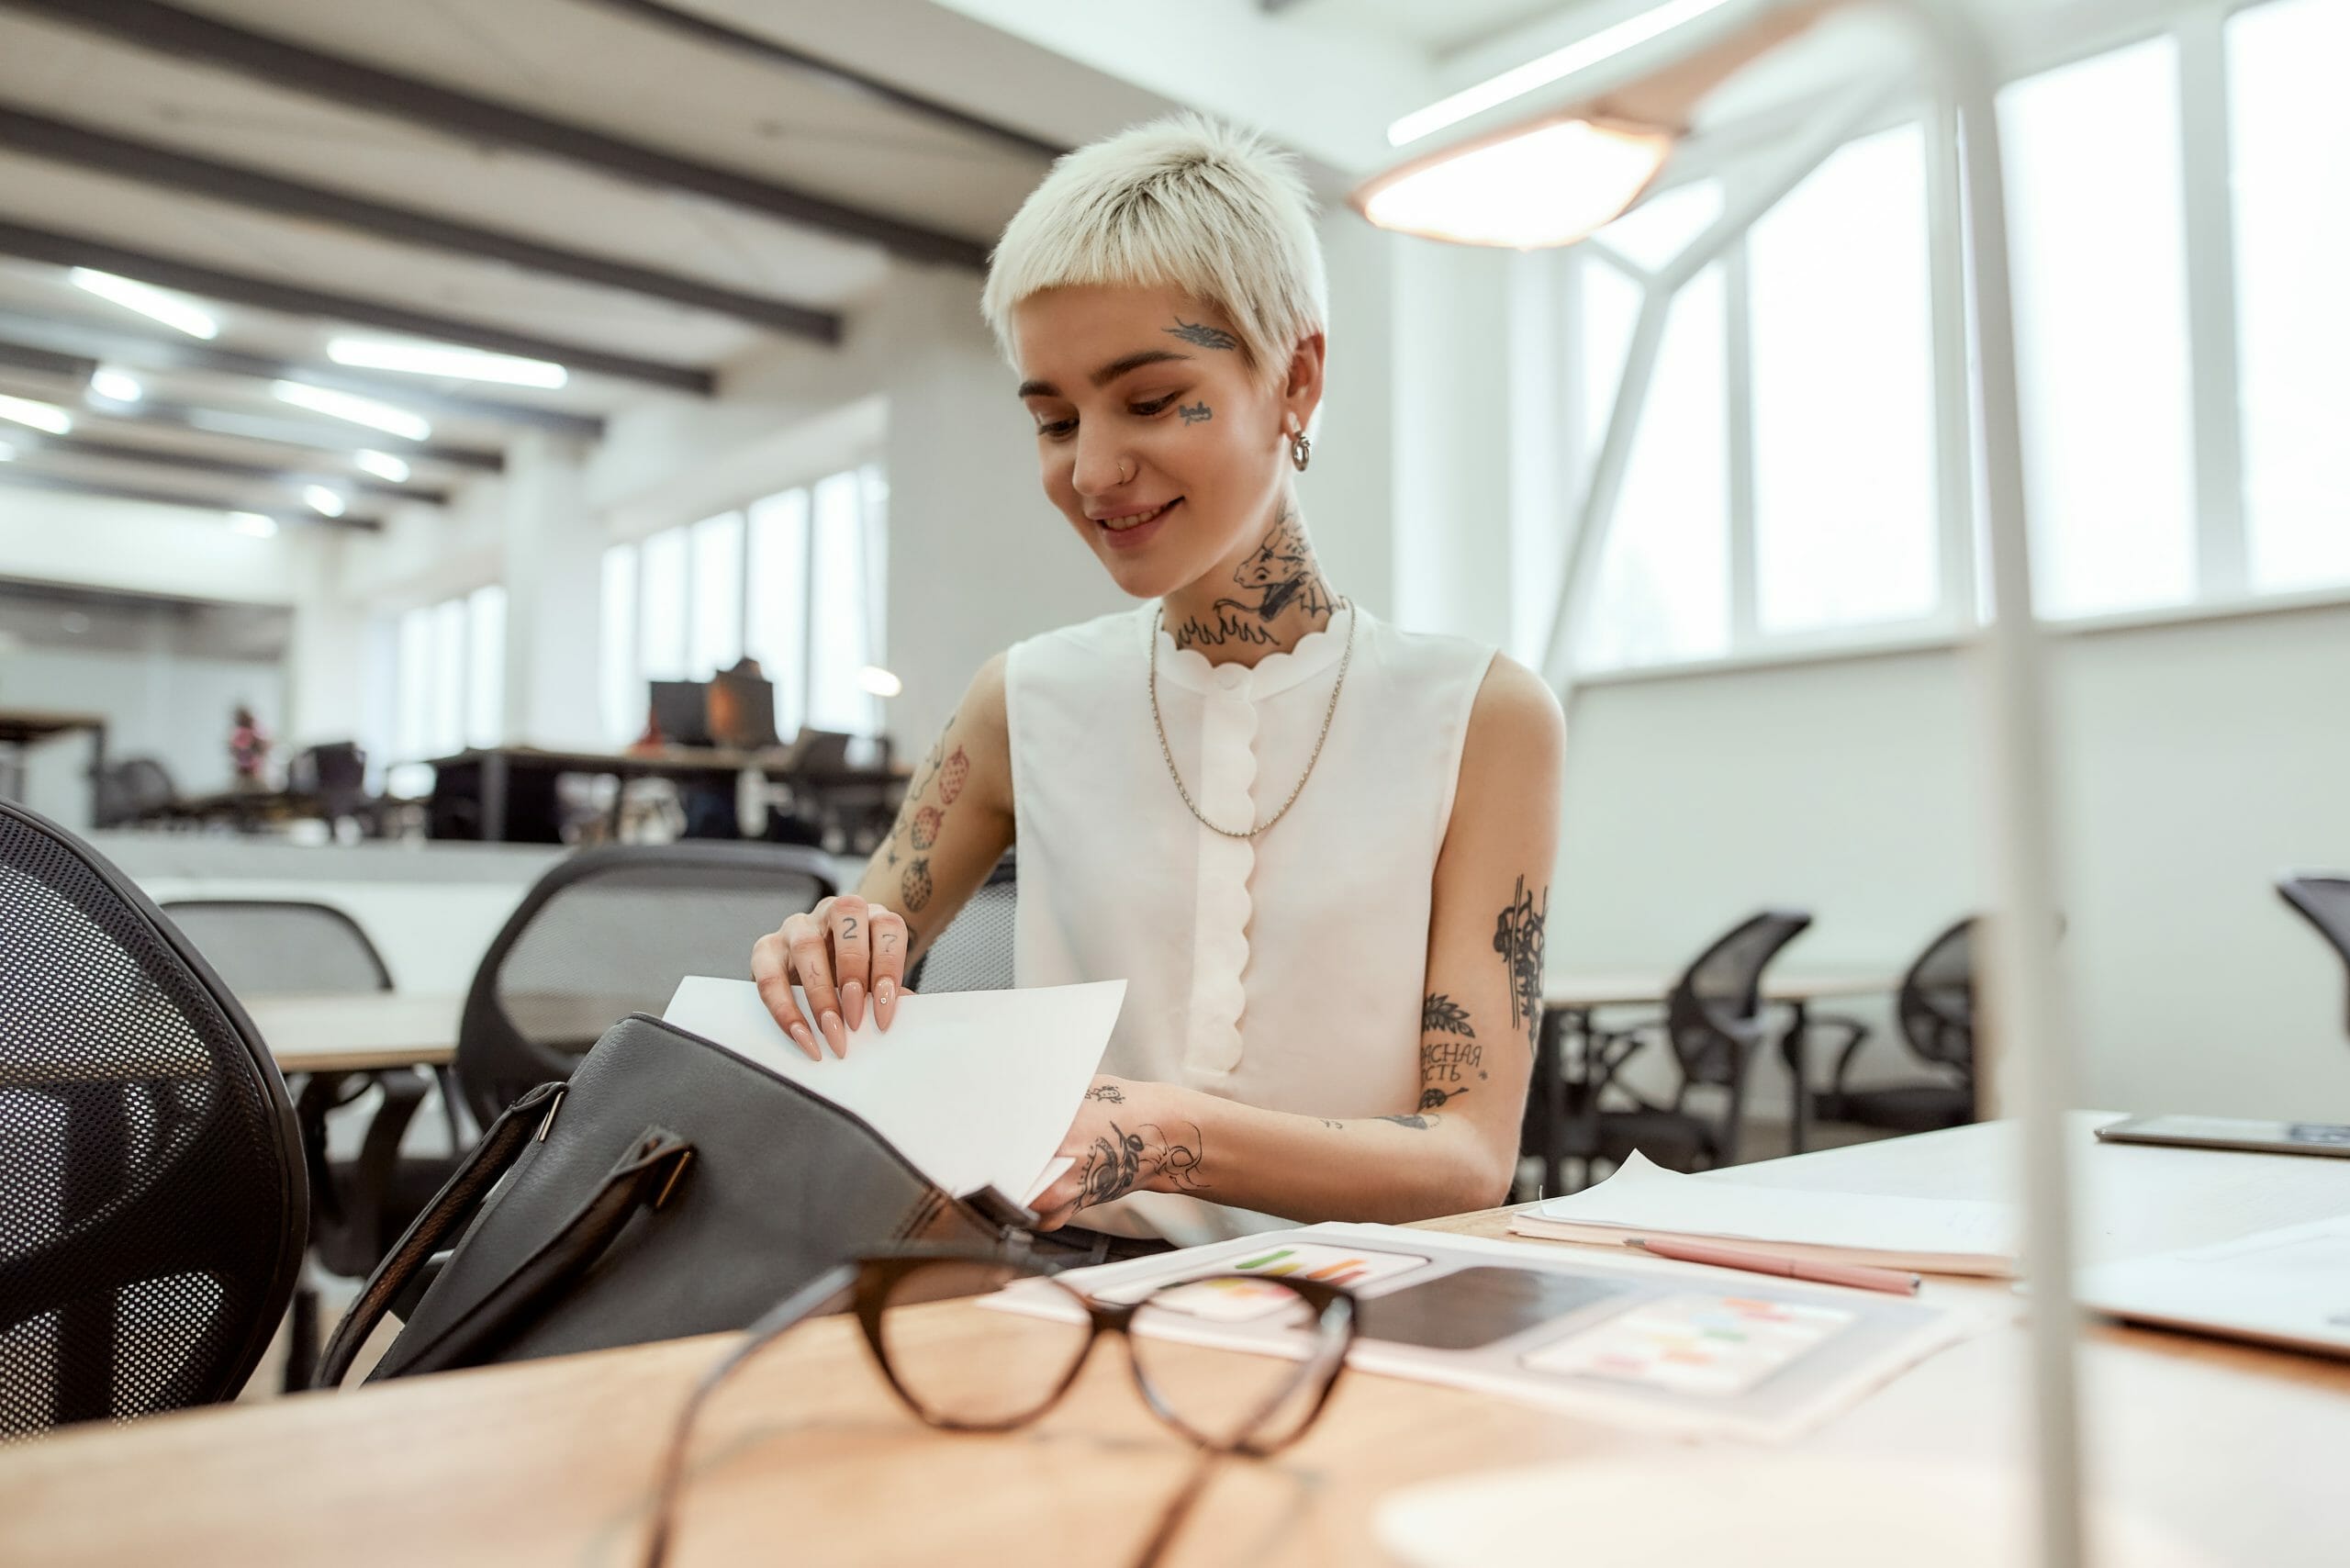 White woman with visible tattoos sitting at an office desk